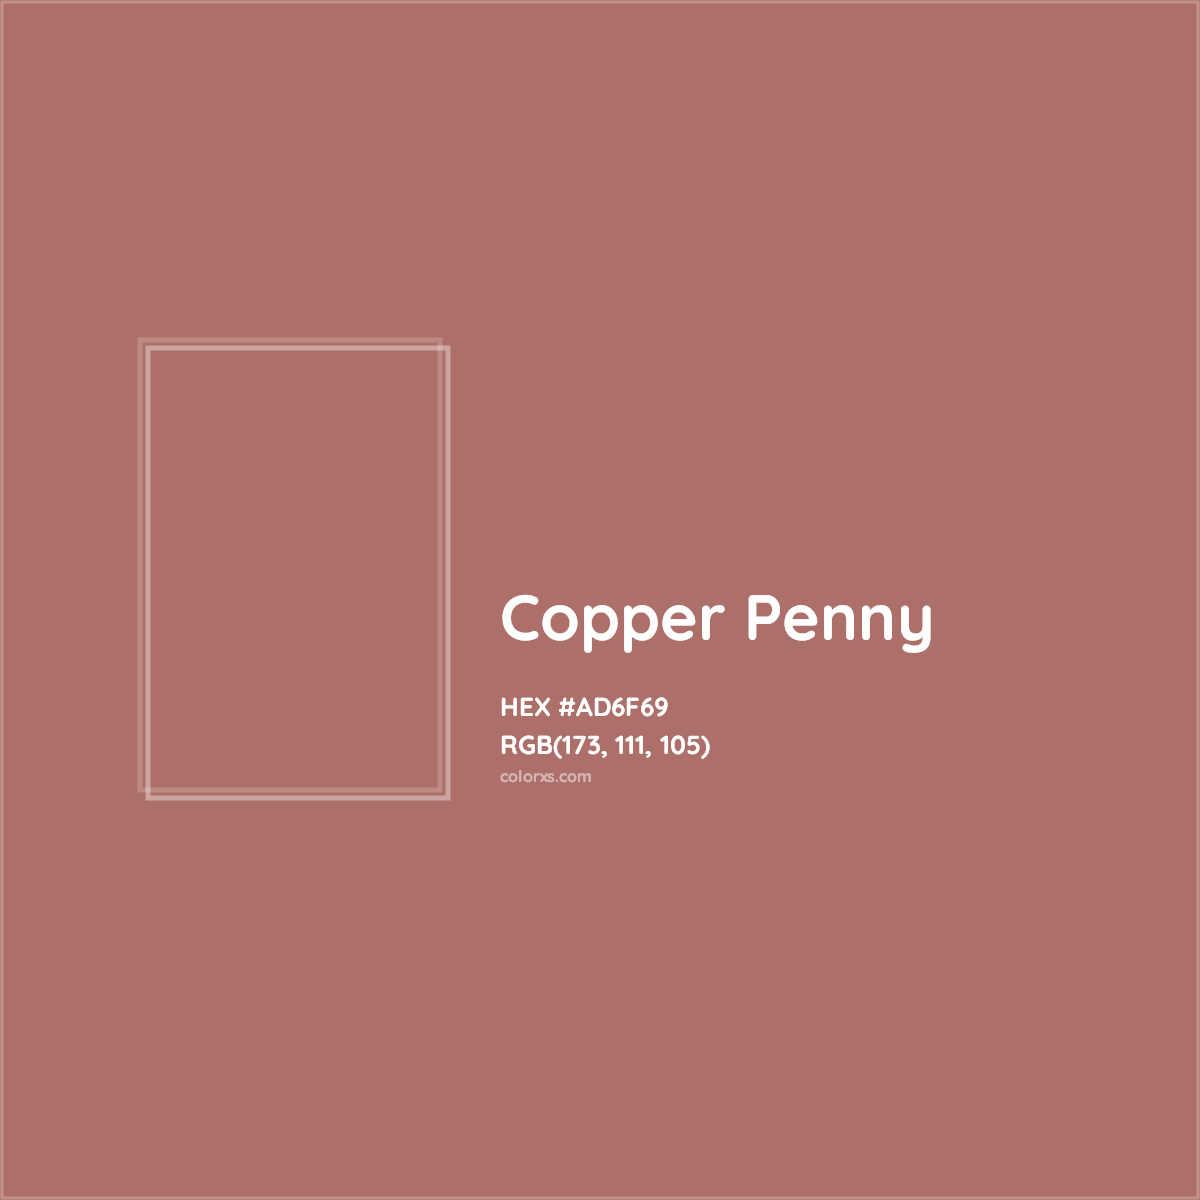 About Copper Penny - Color codes, similar colors and paints 